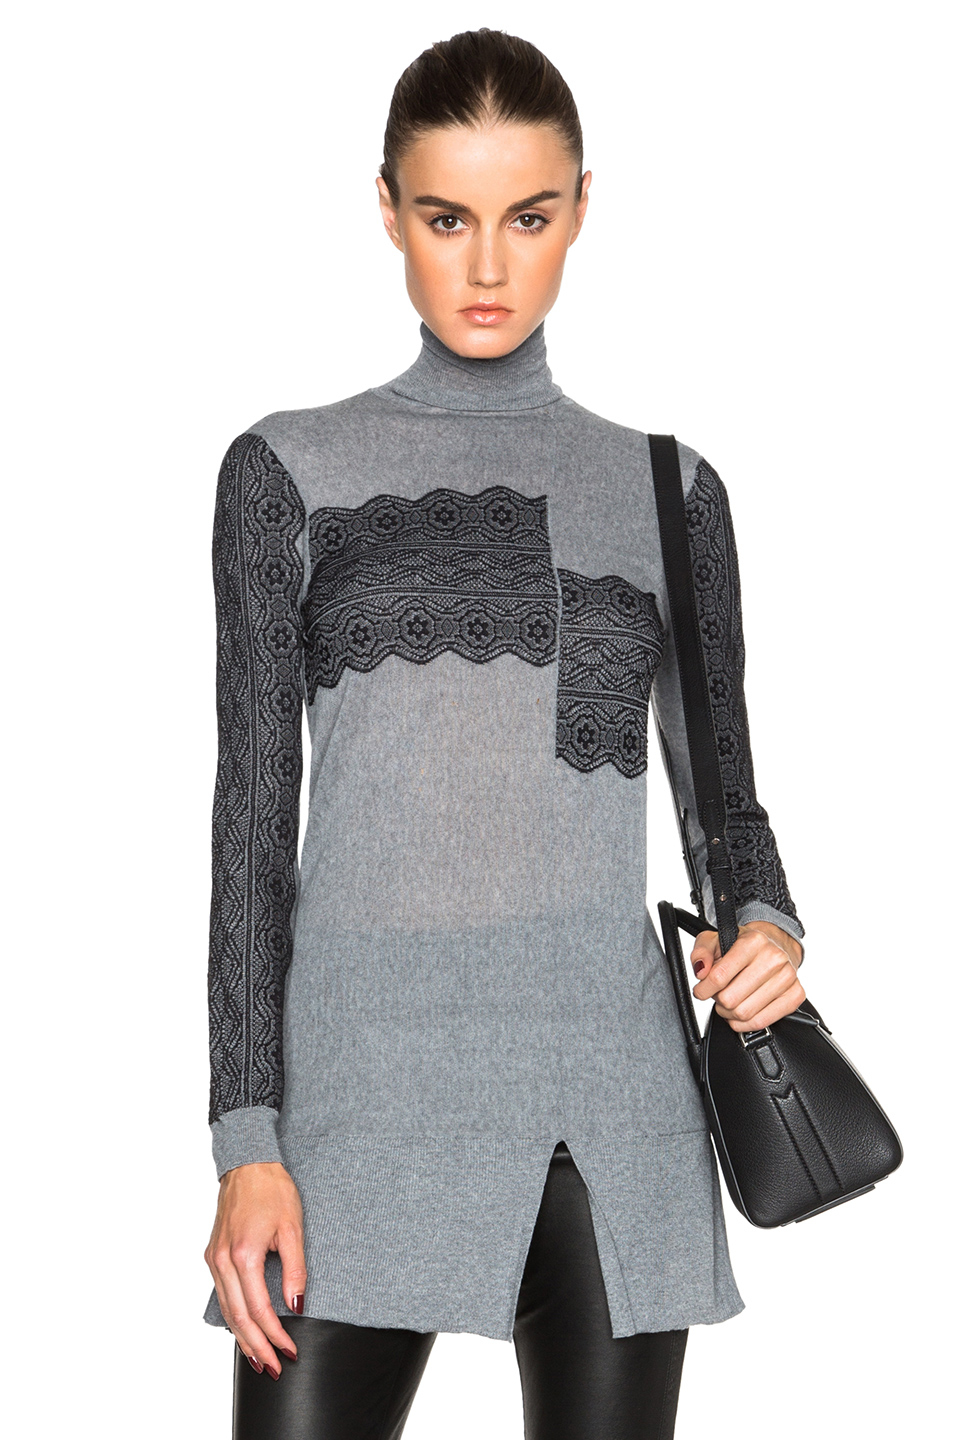 Lyst - Thakoon Lace Crossover Turtleneck in Gray